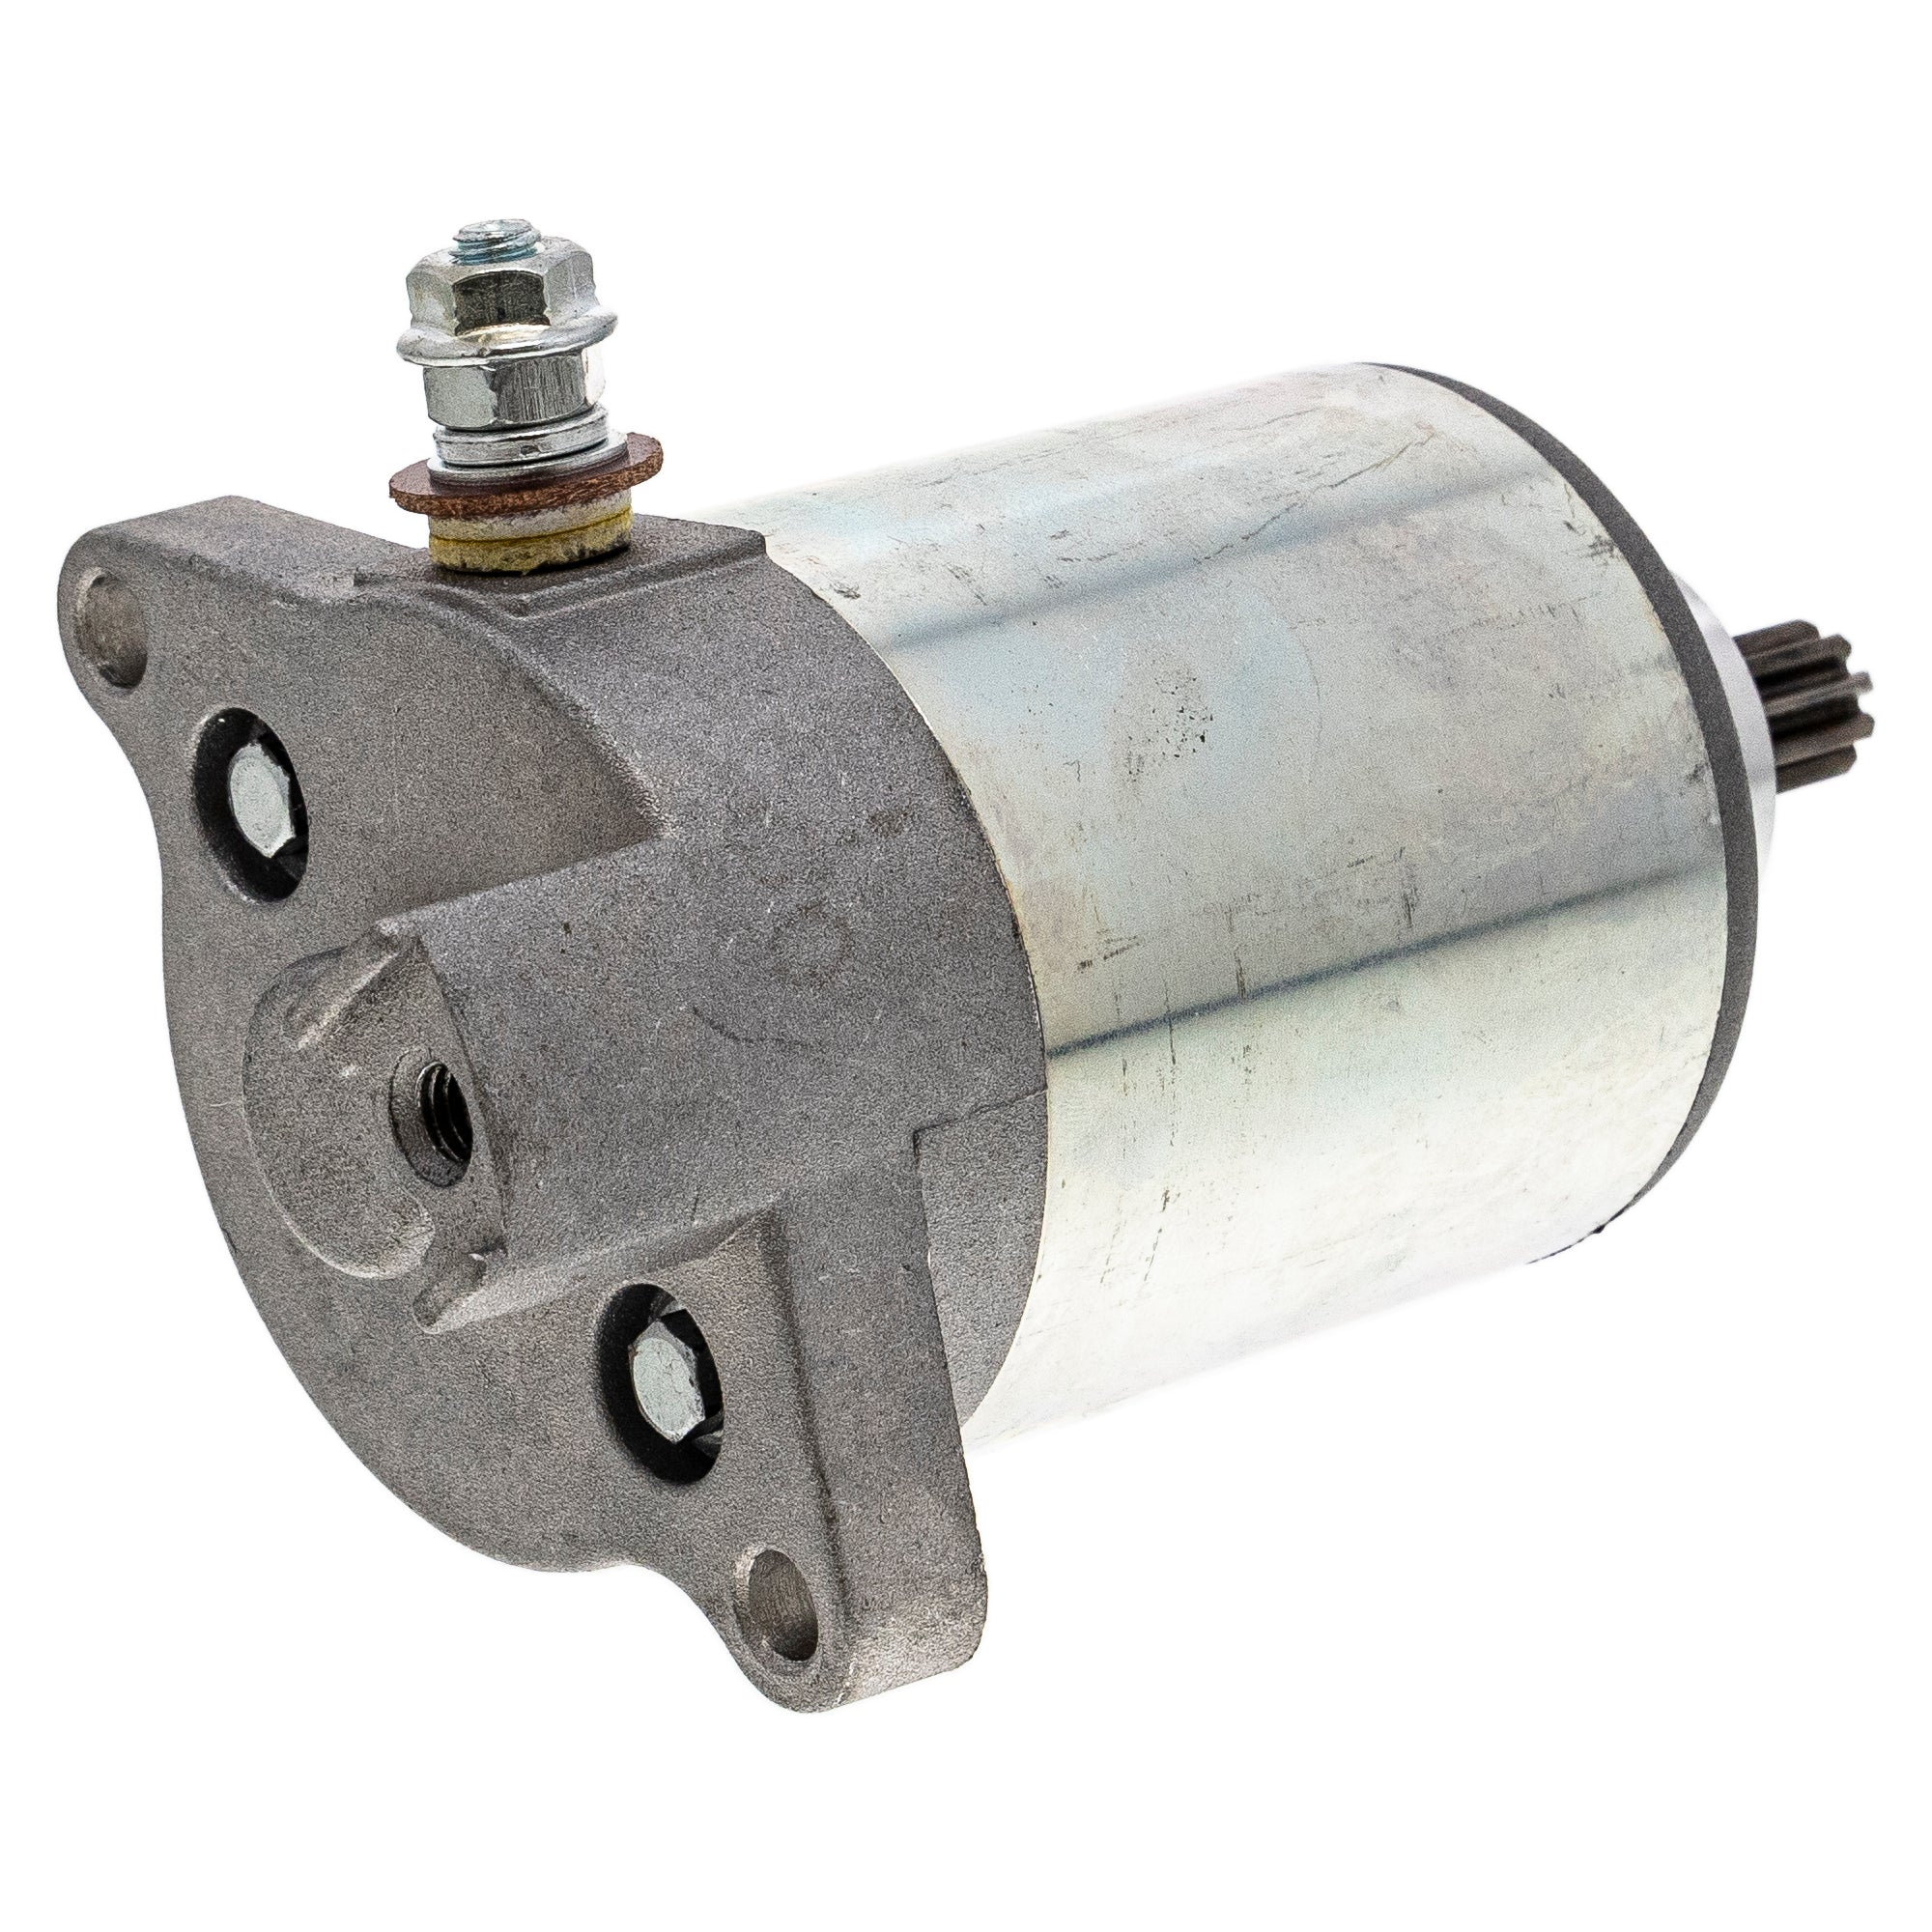 Starter Motor Assembly 519-CSM2380O For Piaggio AP8580124 82611R 580442